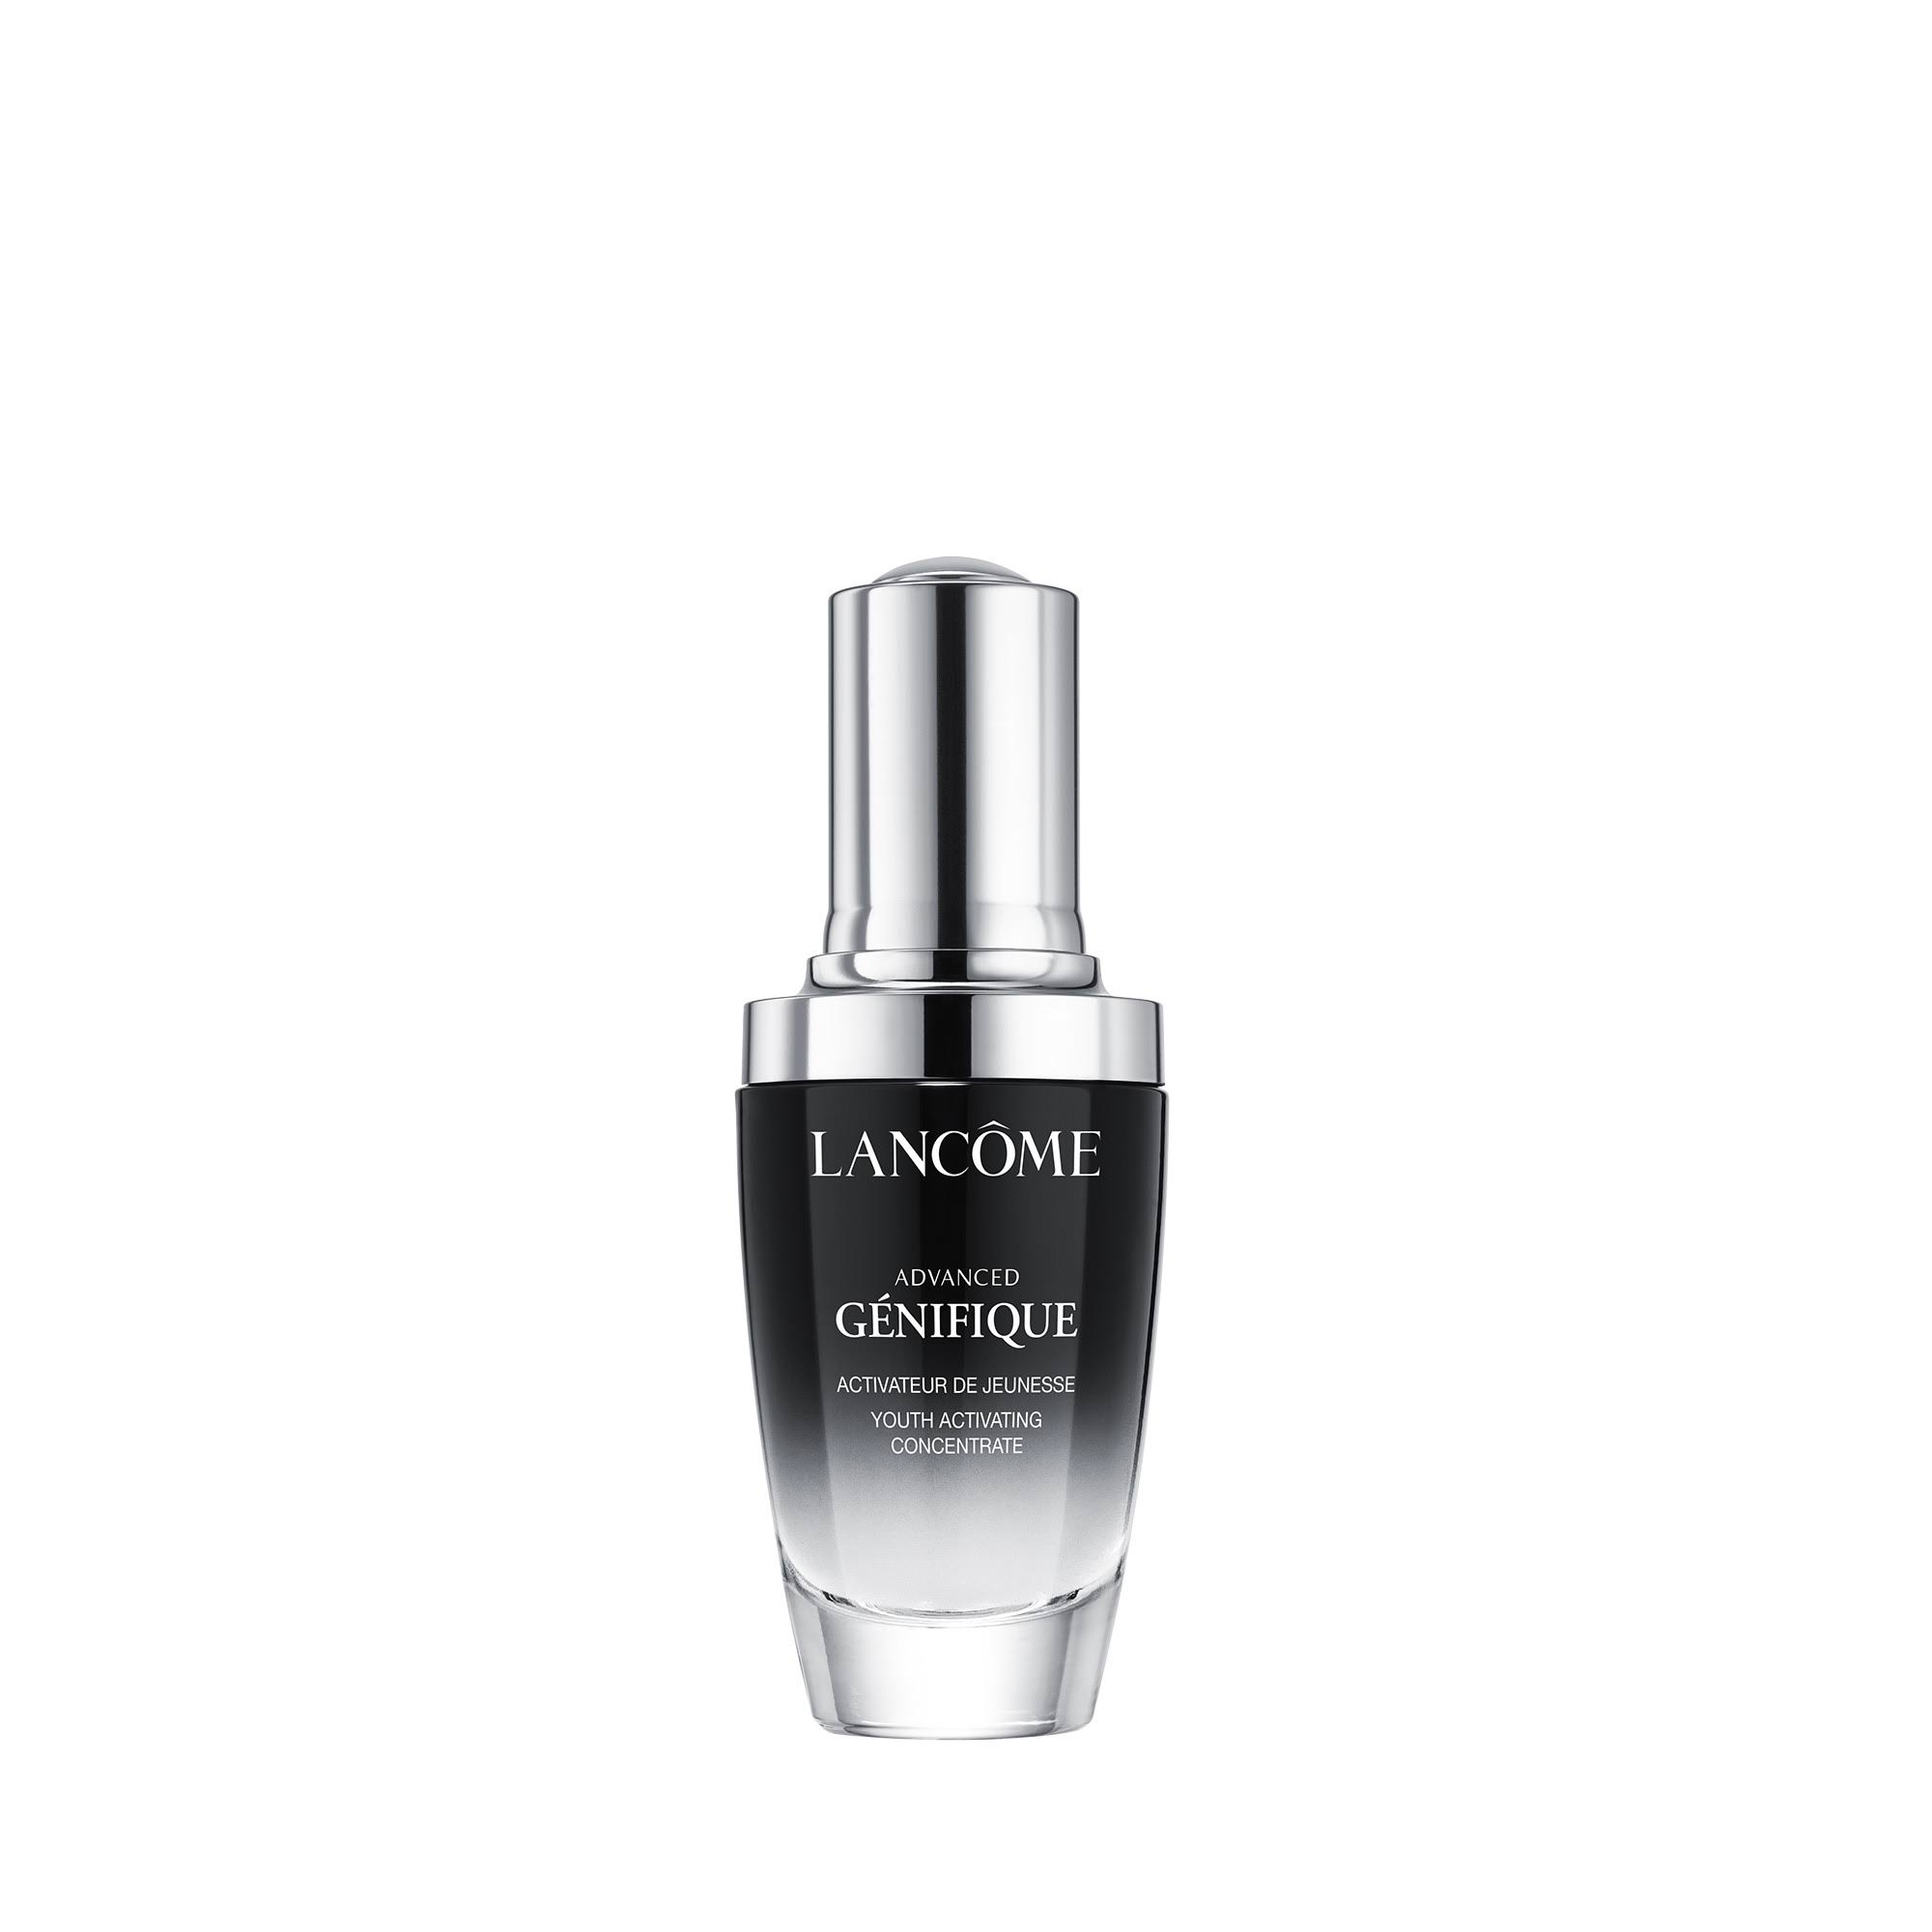 Lancome Advanced Genifique Youth Activating Concentrate Serum - 30ml